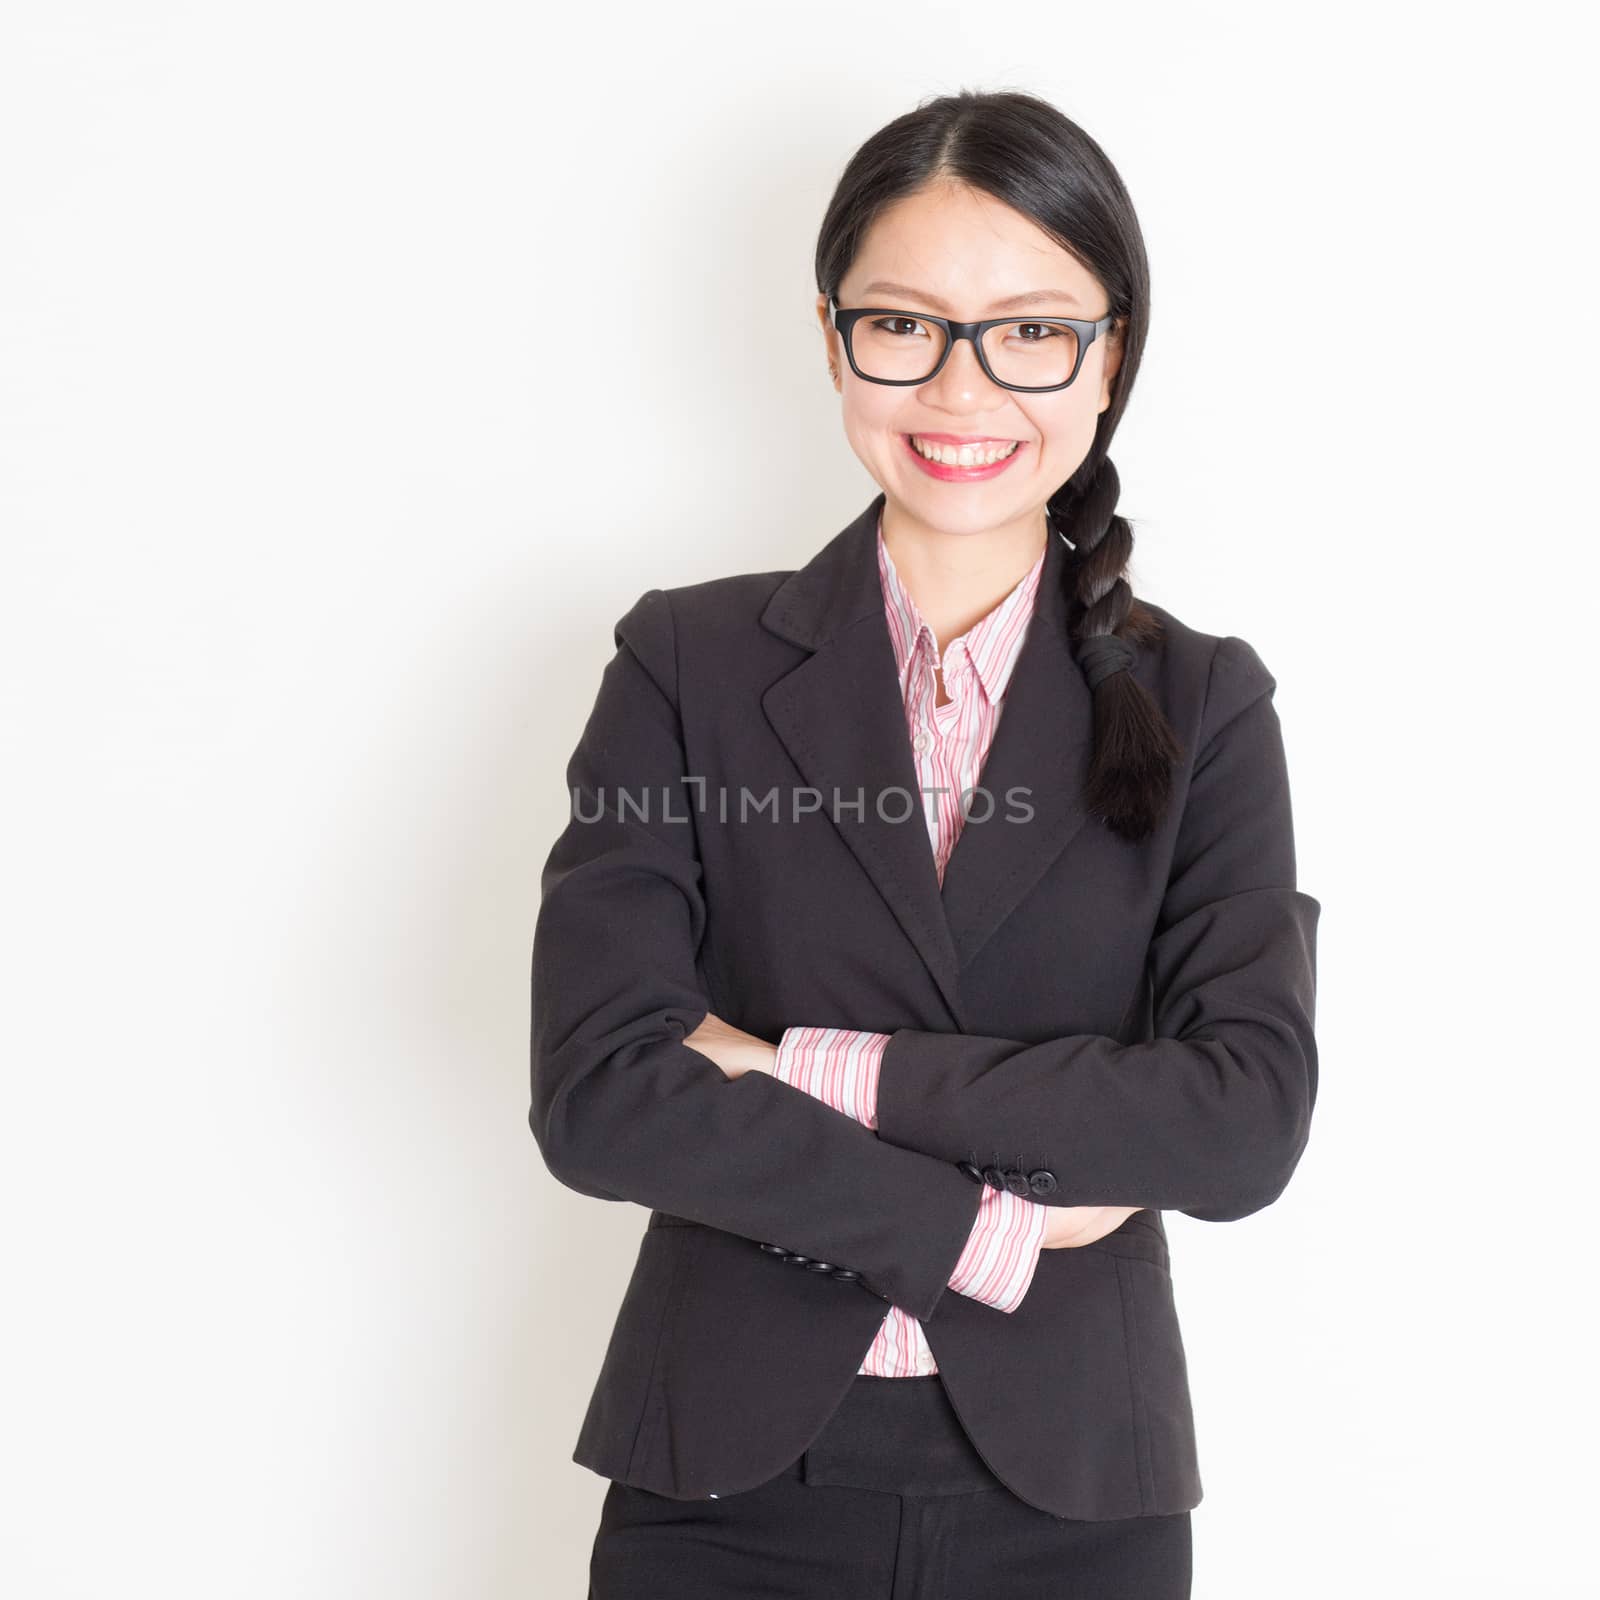 Portrait of Asian businesswoman in formalwear smiling and looking at camera, standing on plain background.